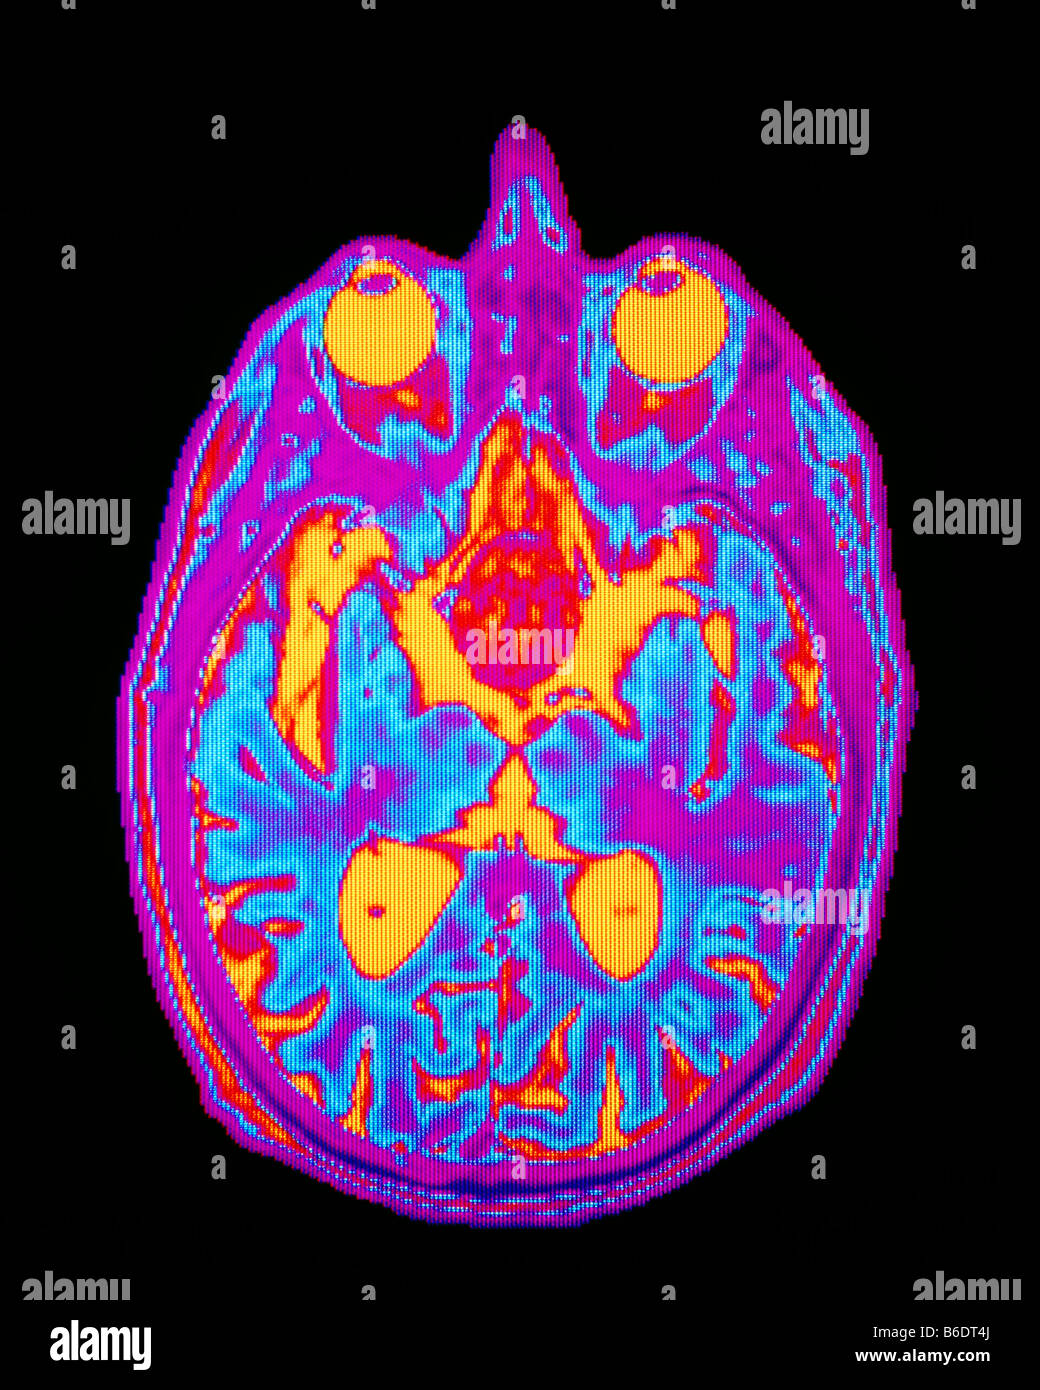 Pituitary tumour: false-colour magnetic resonanceimage (MRI) of an axial section of the brainshowing a large pituitary adenoma. Stock Photo